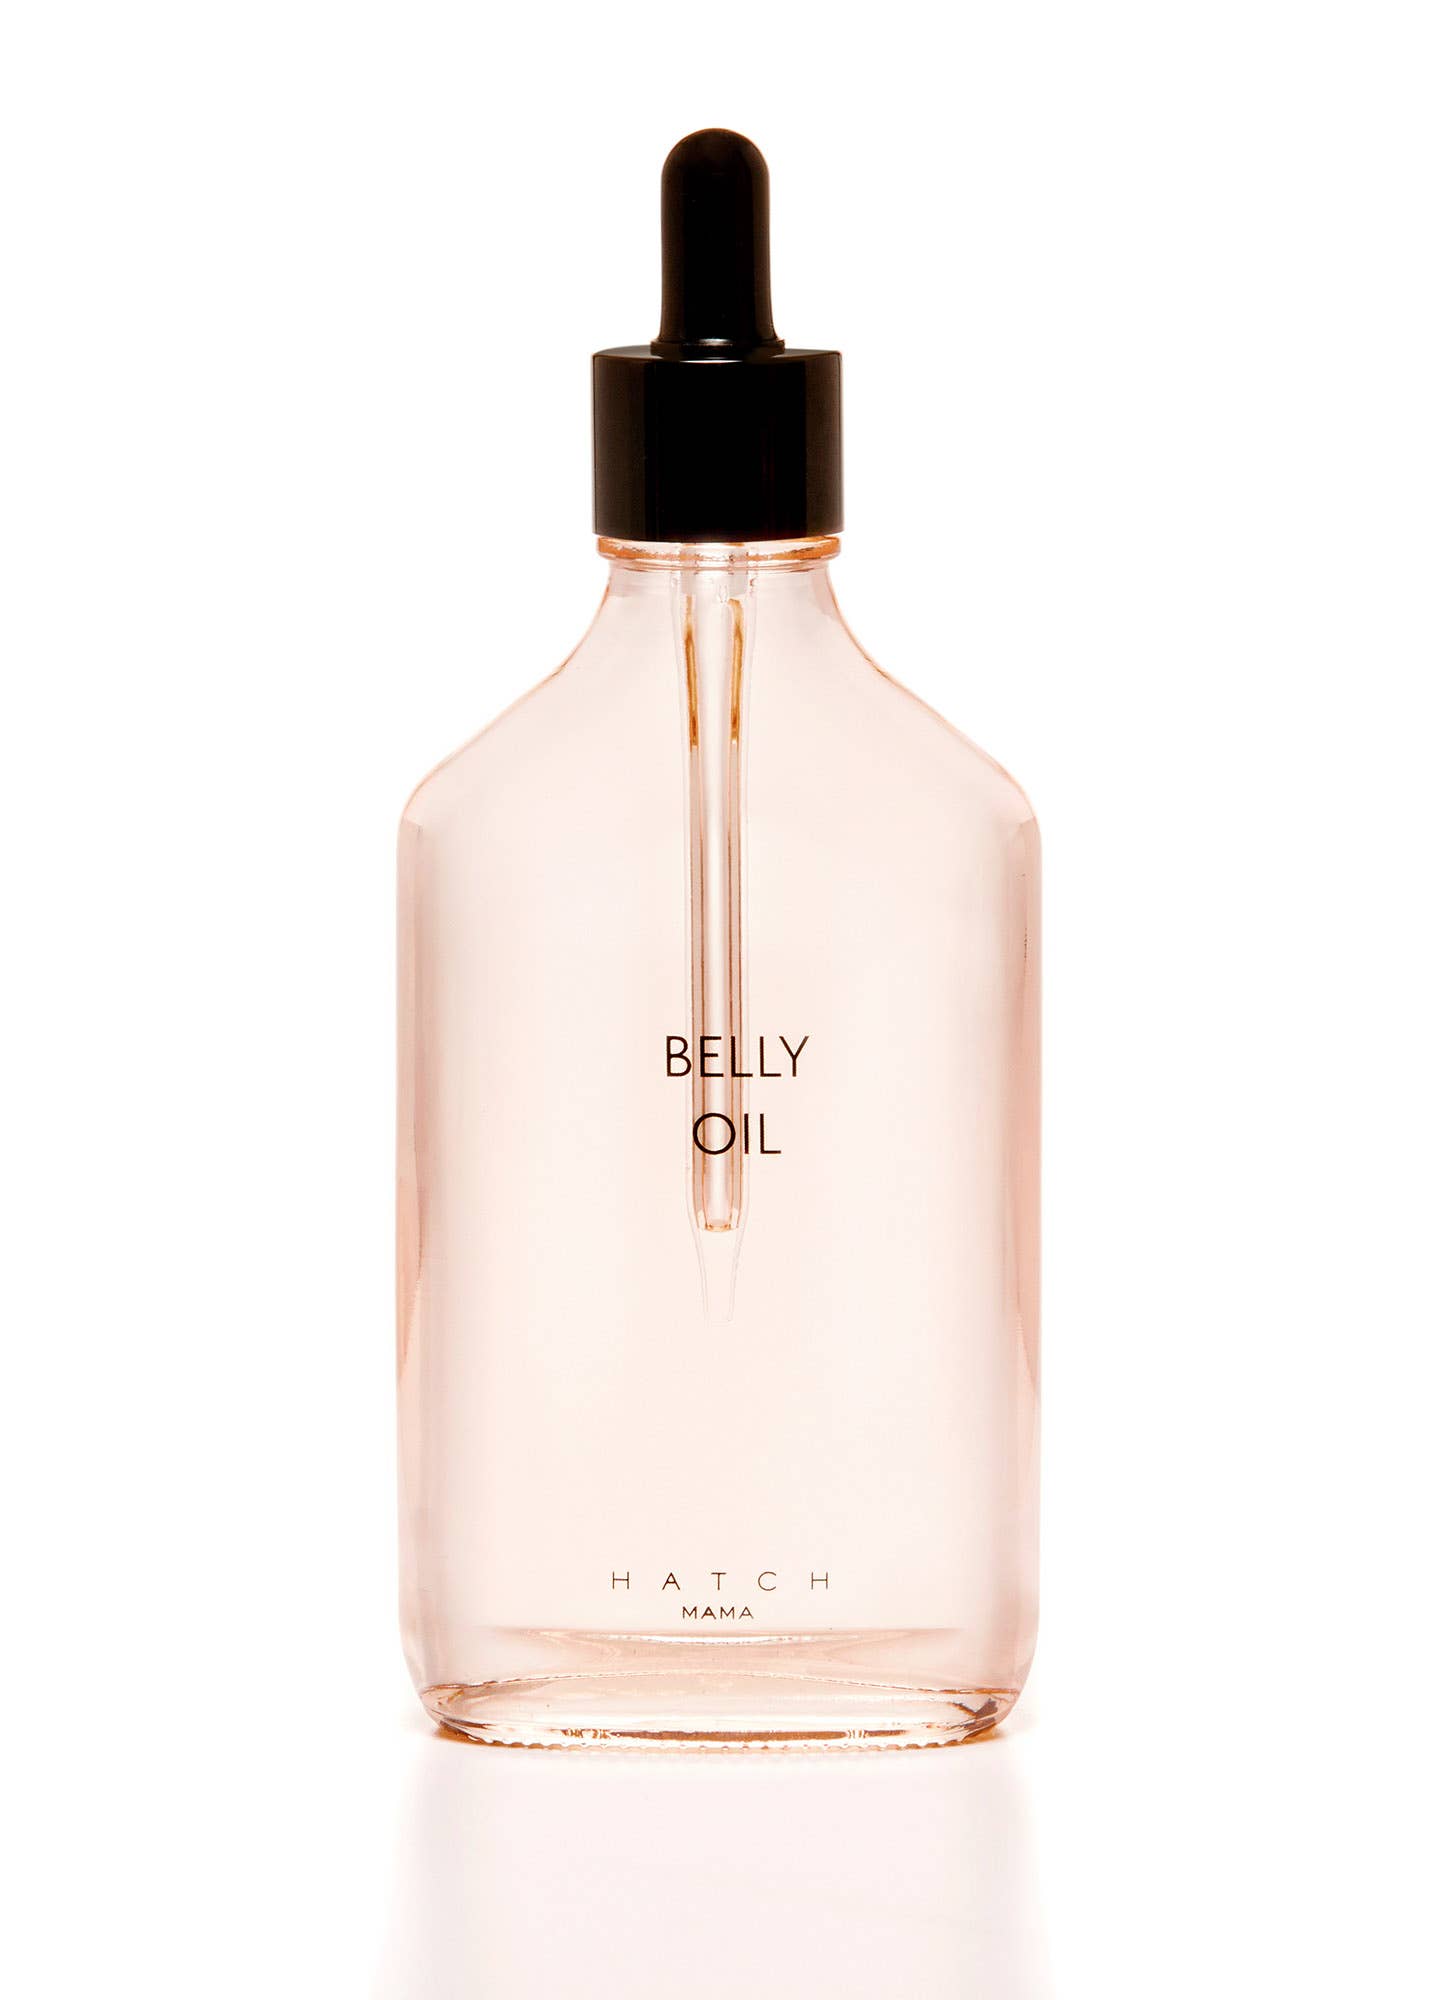 HATCH Collection - Belly Oil